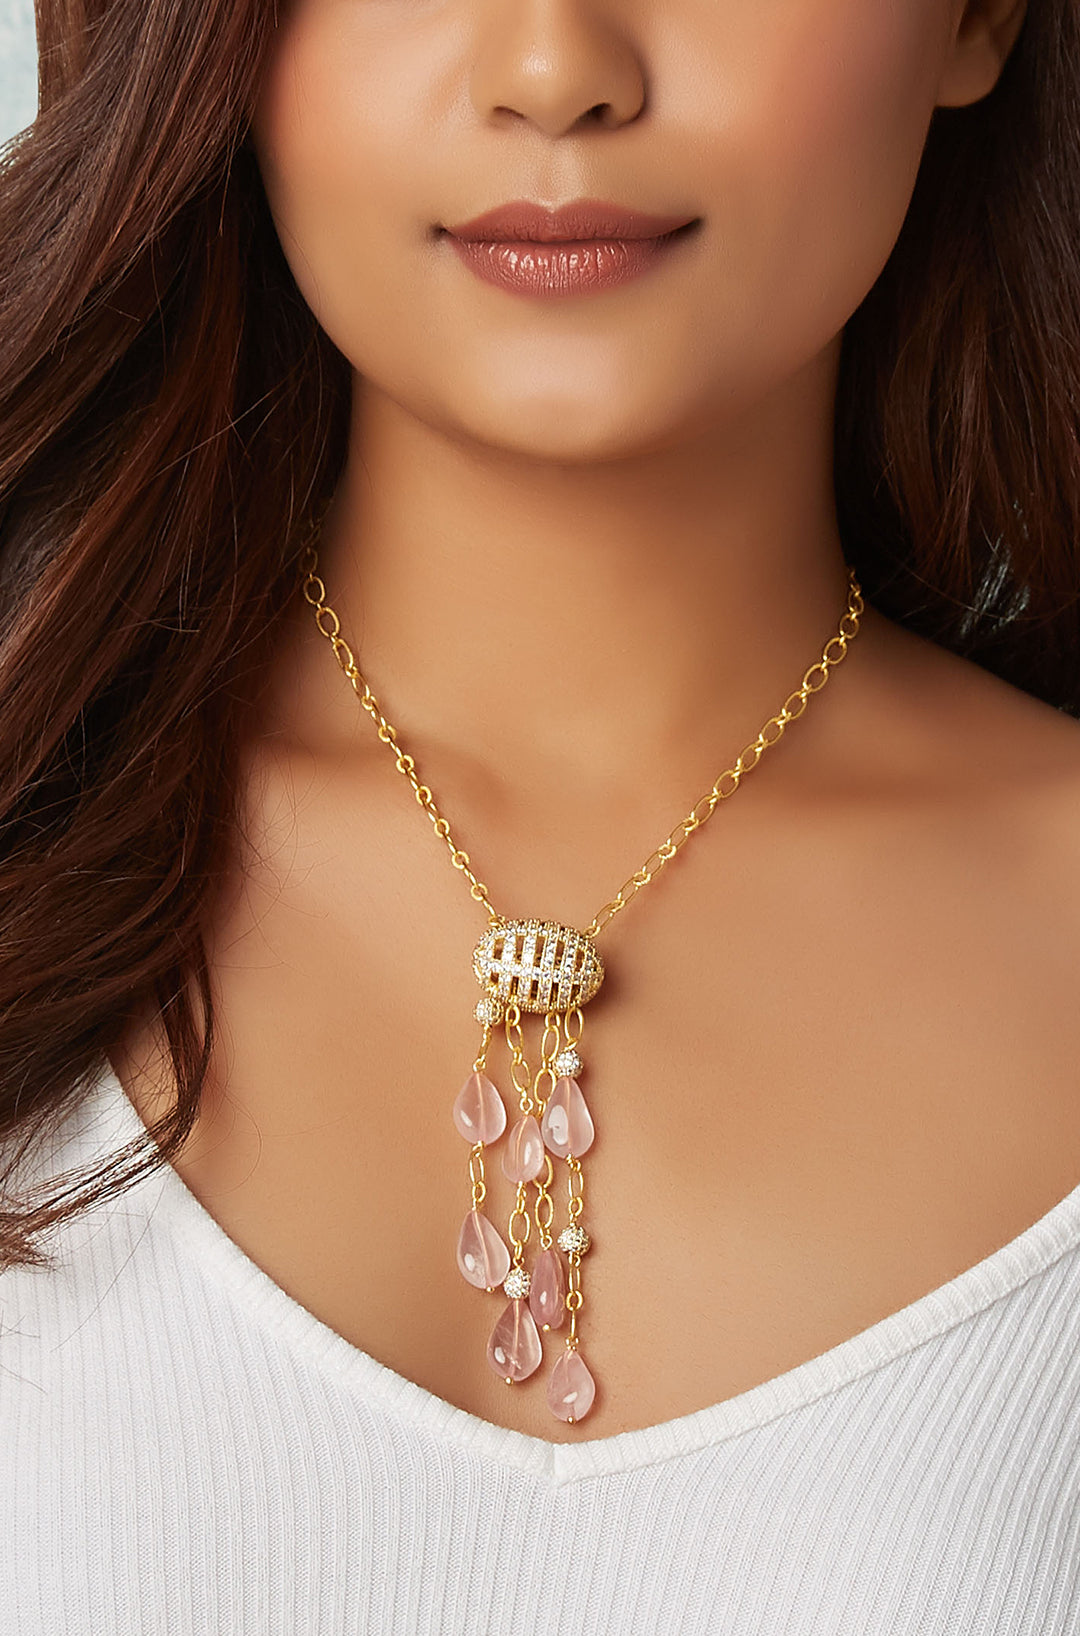 Tasseled Necklace With Pink Rose Quartz - Joules by Radhika